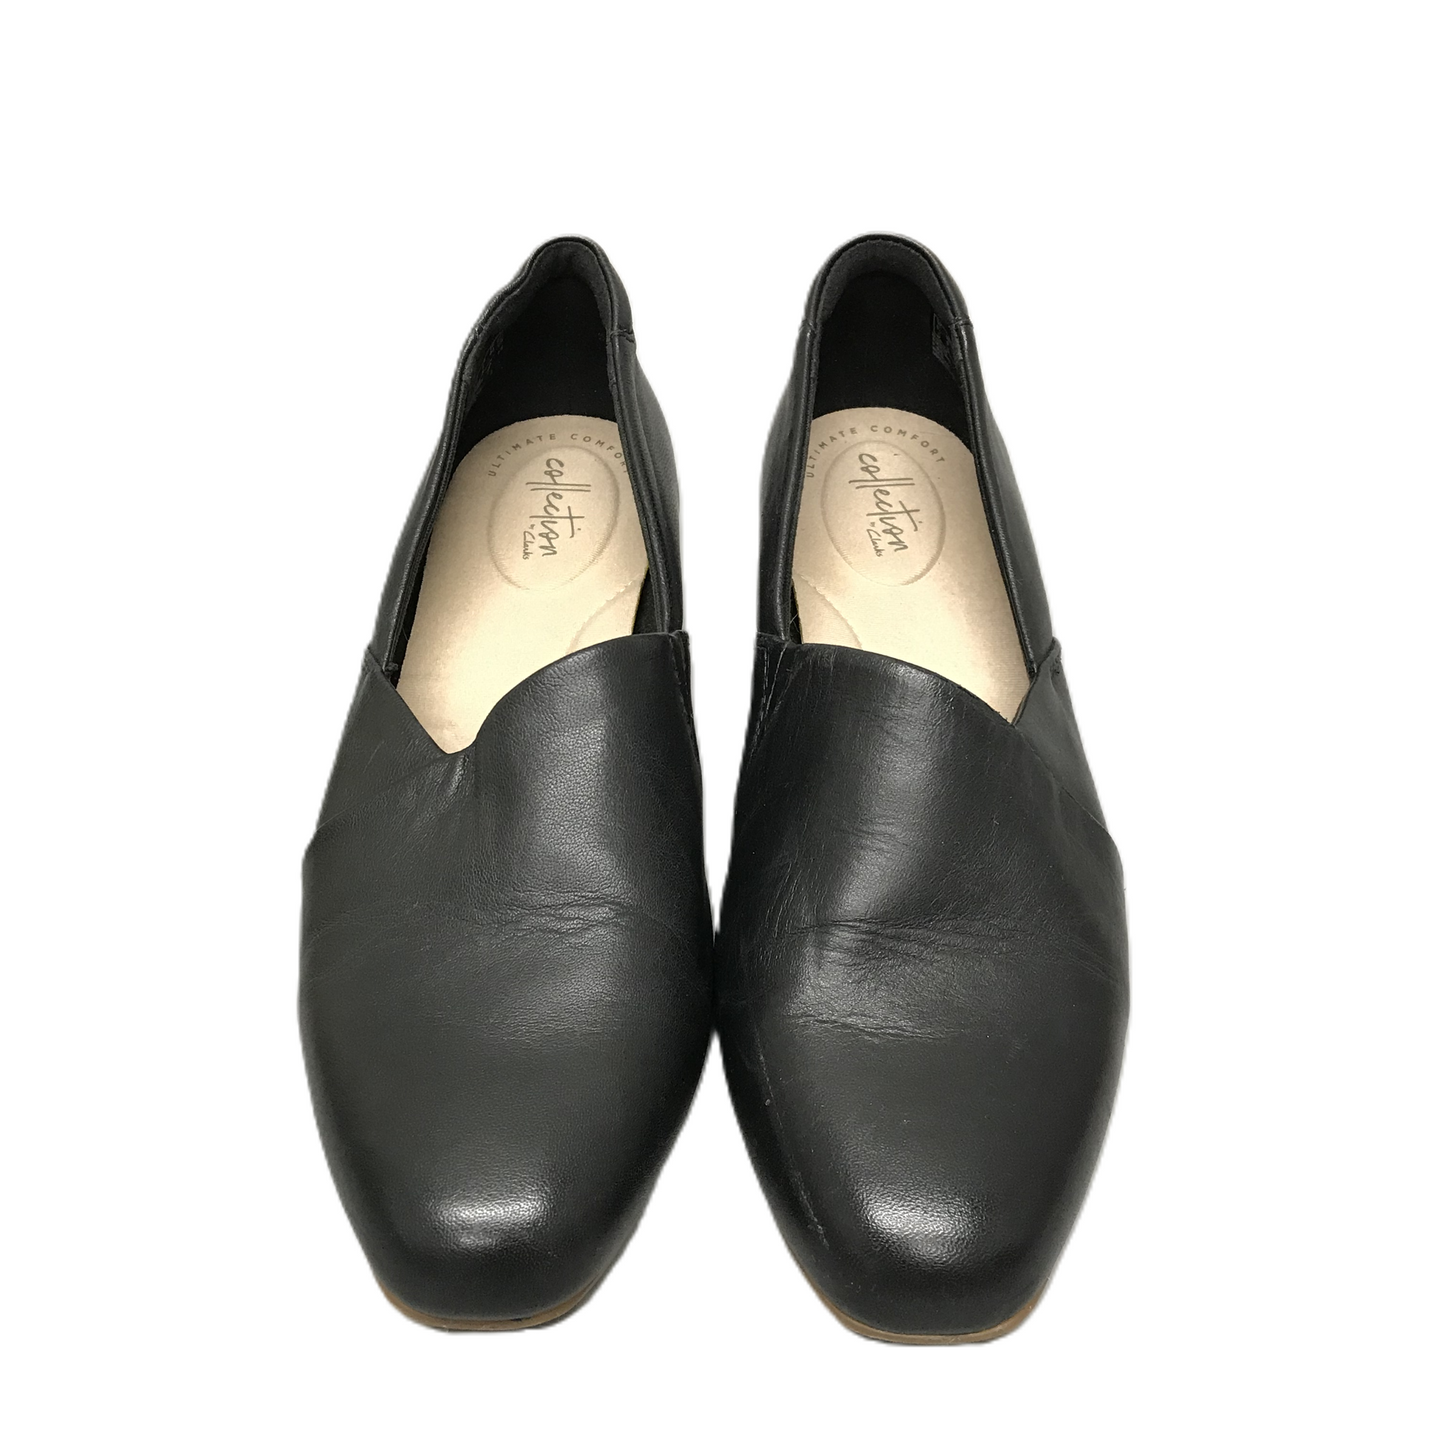 Black Shoes Flats By Clarks, Size: 9